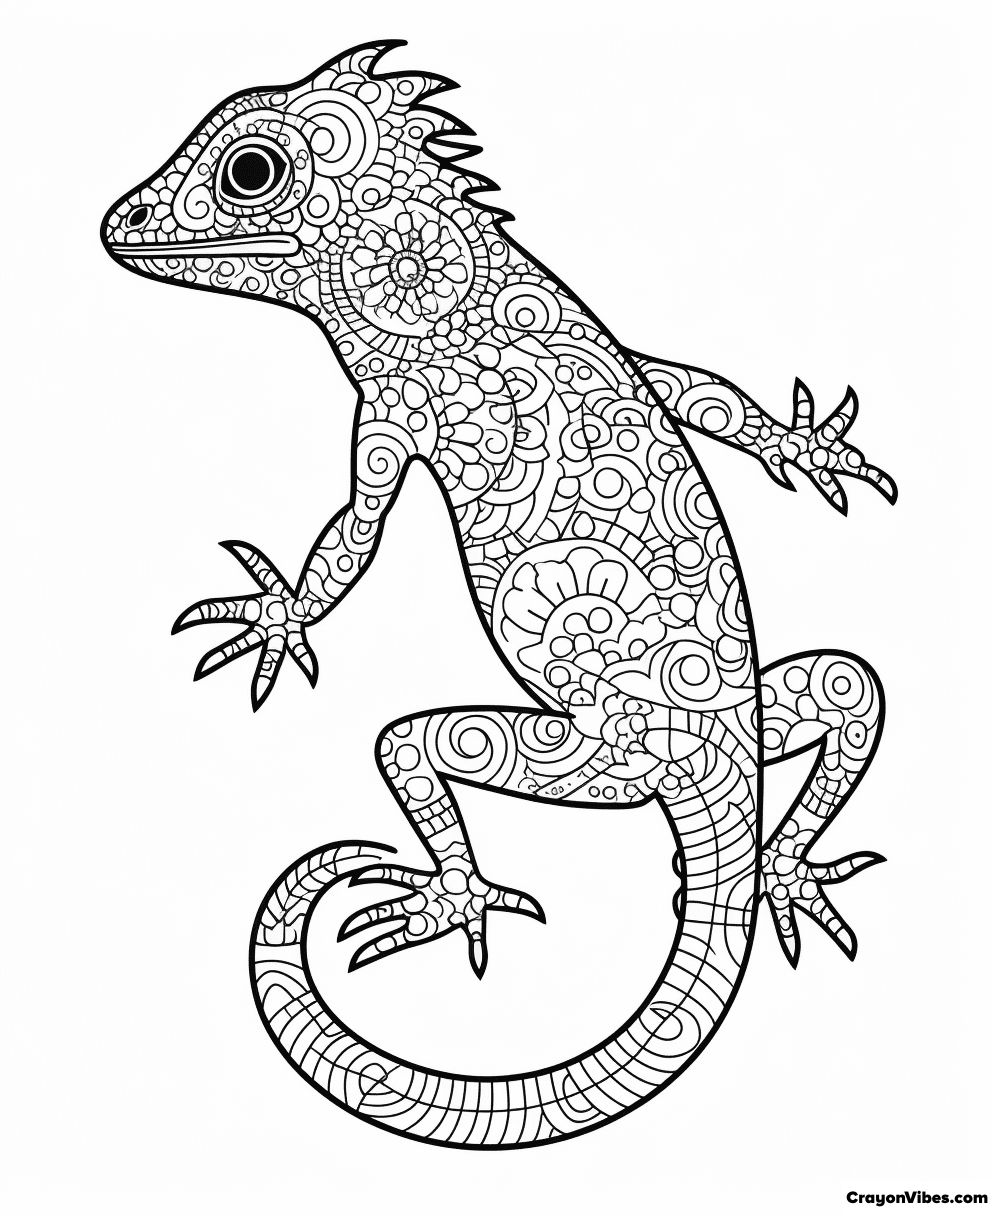 Lizard Coloring Pages Free Printable for Adults & kids